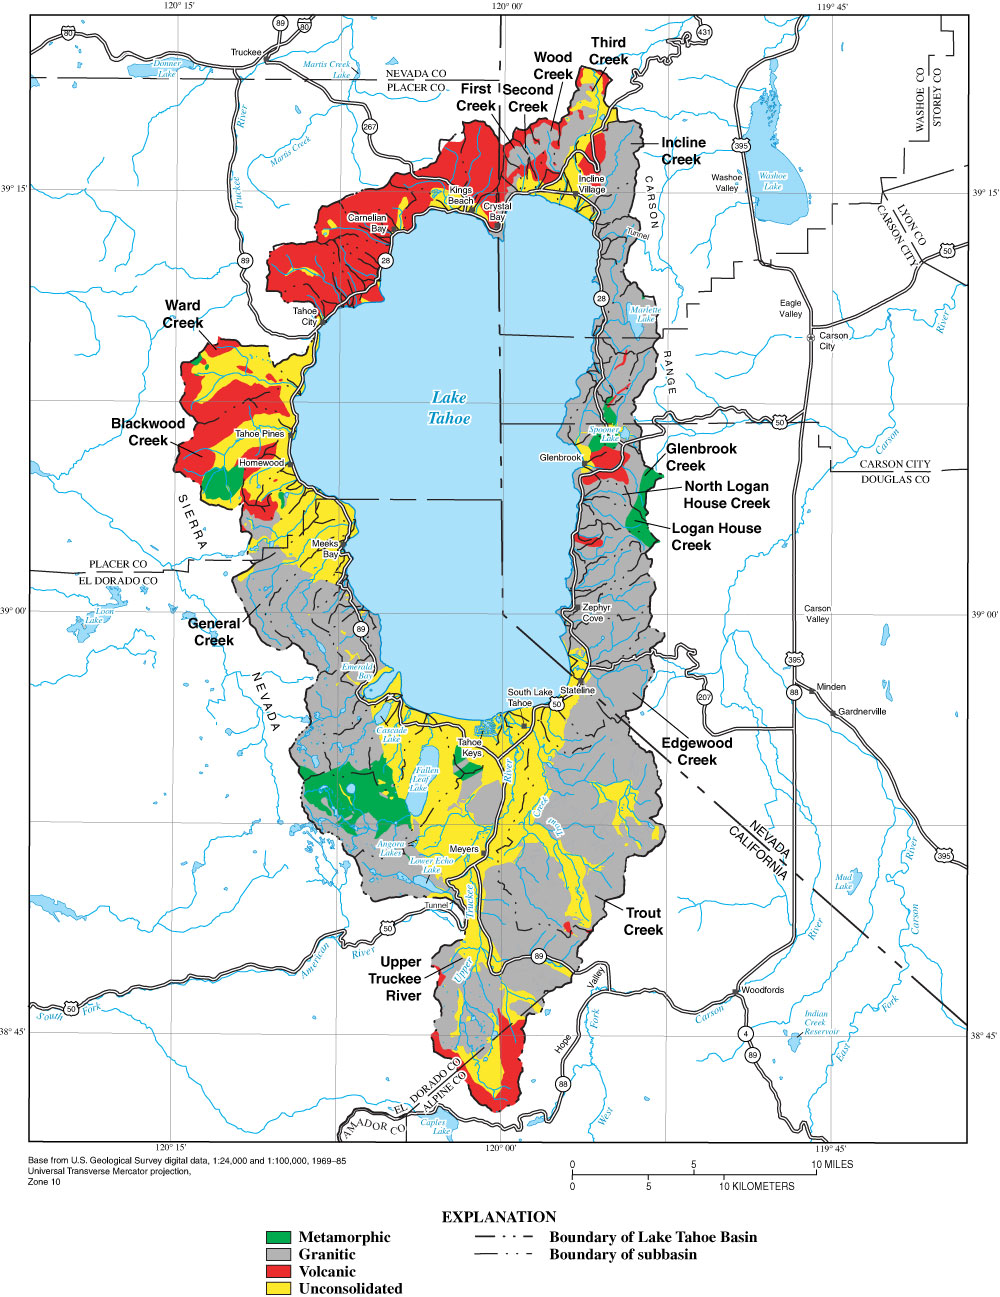 Map showing geology of selected monitored watersheds in Lake Tahoe Basin.